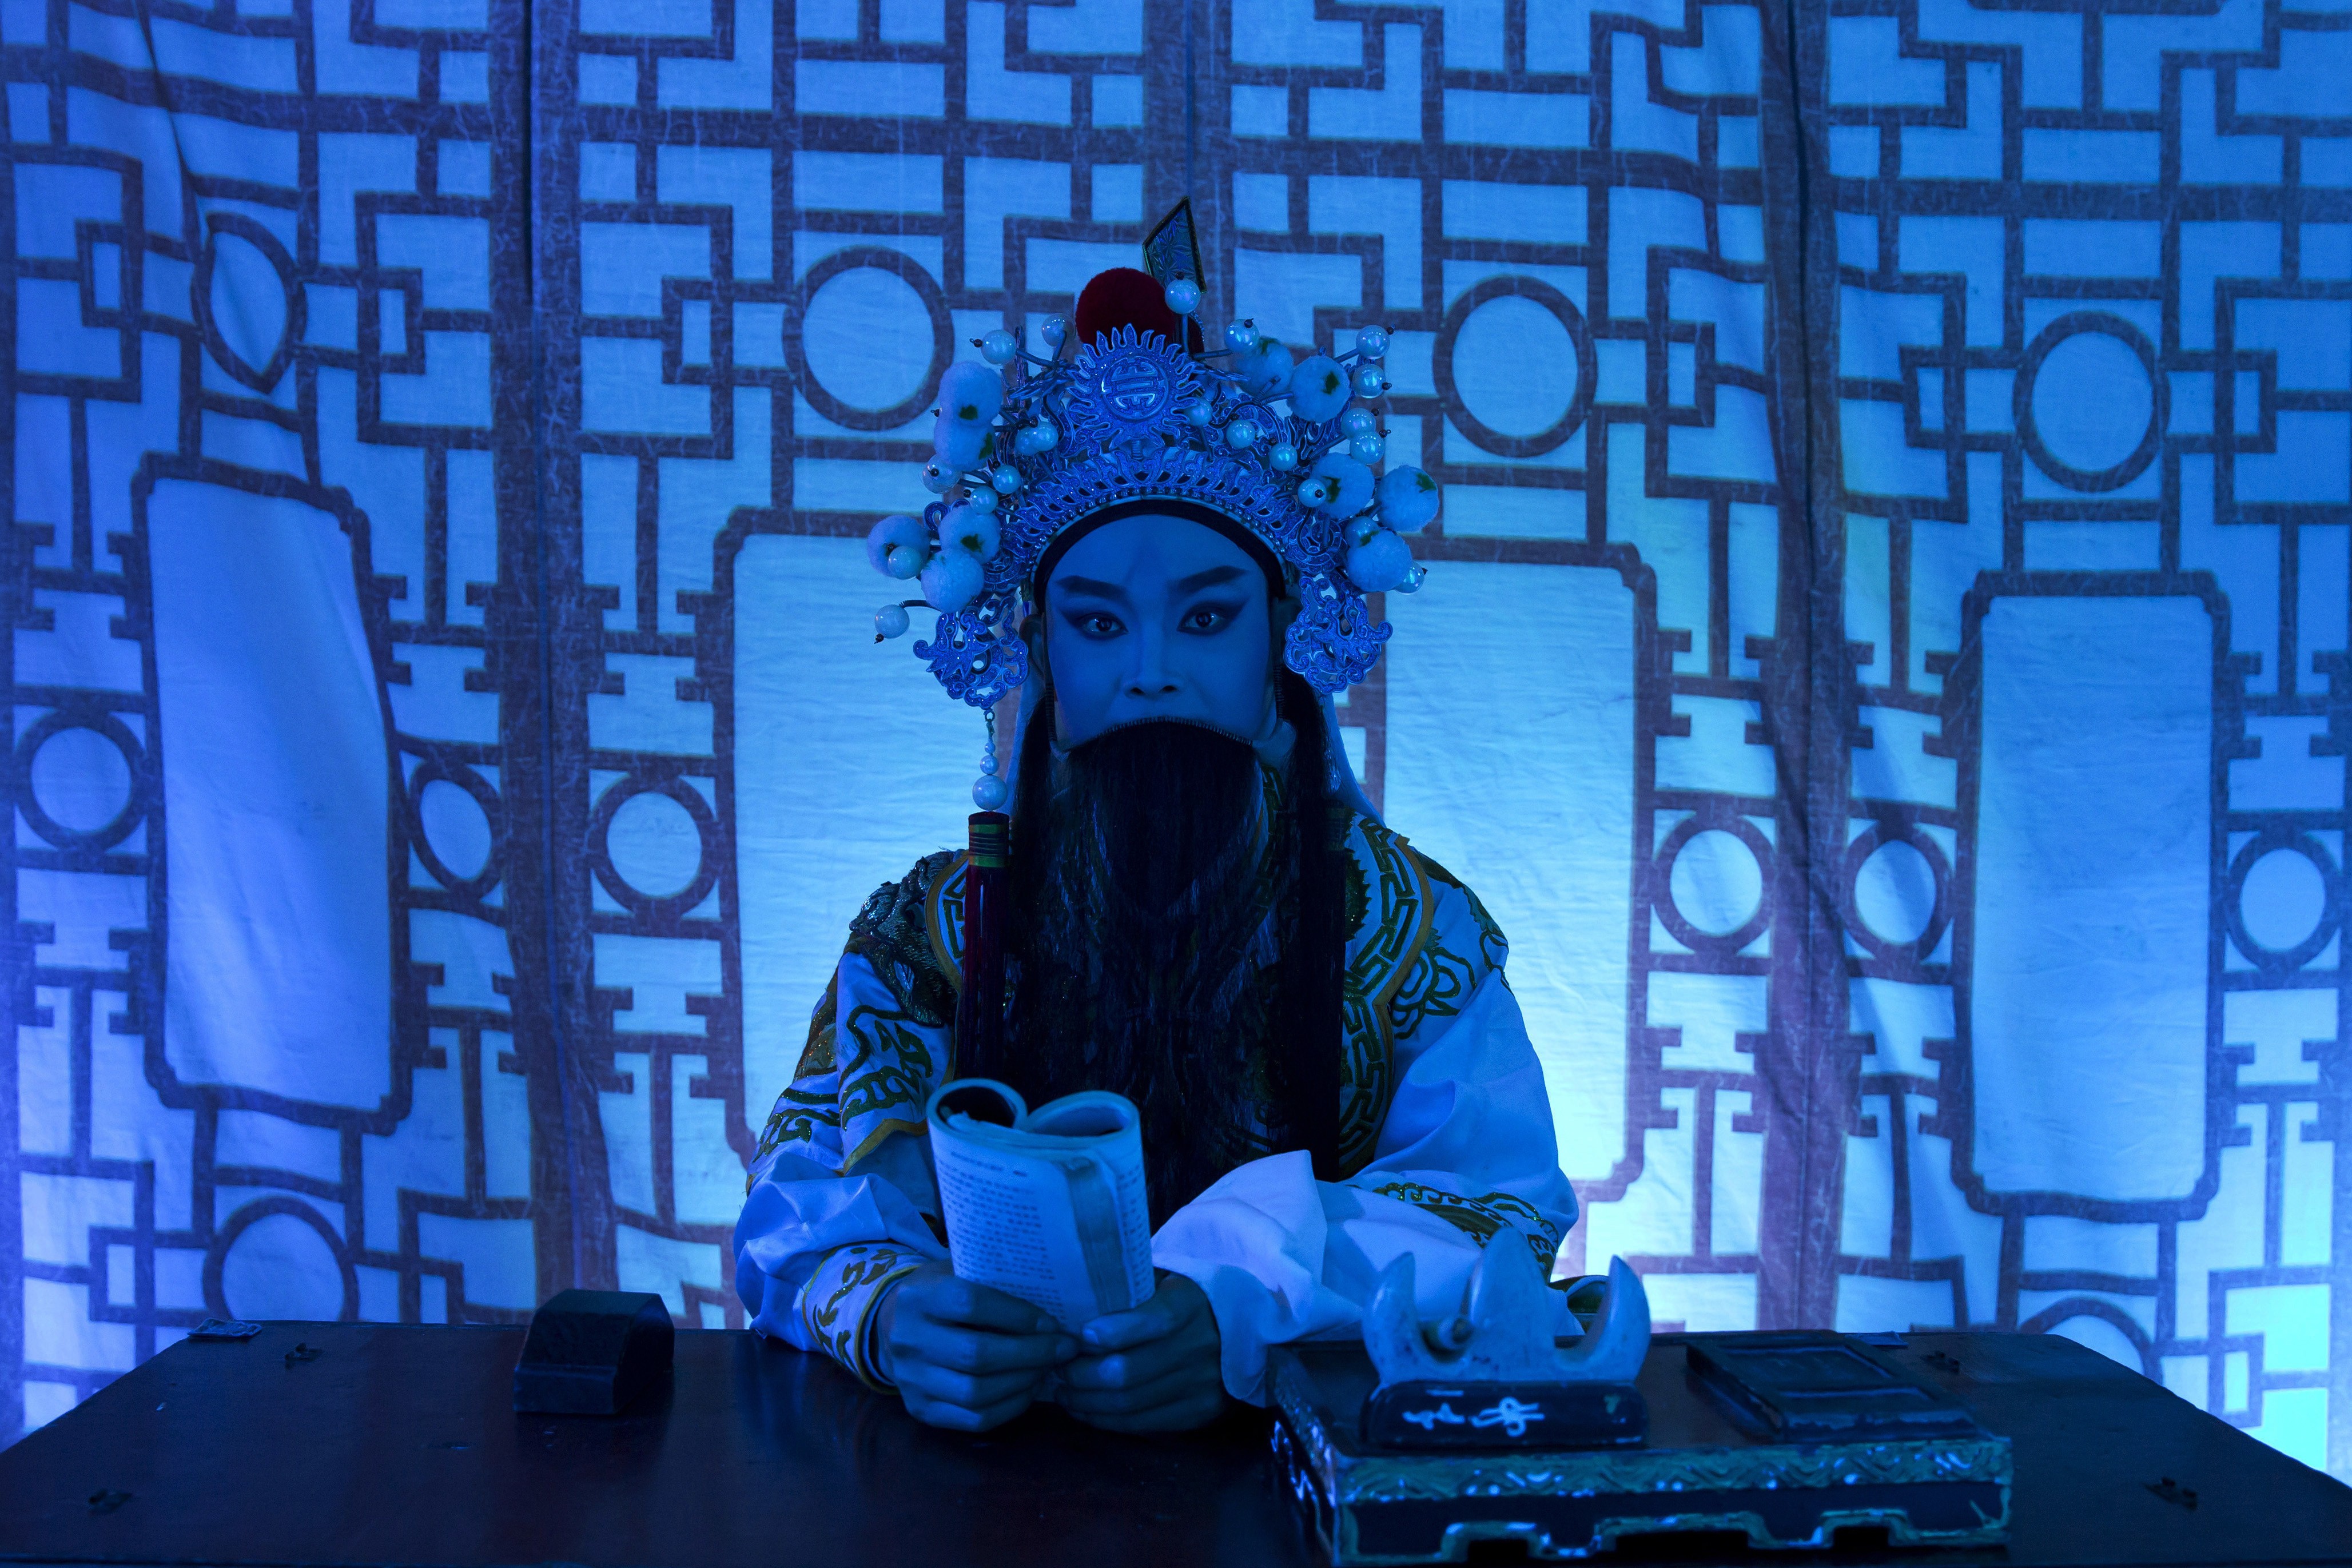 The ‘Ghost Gate’ opens and restless spirits roam the world during the Yu Lan, or Hungry Ghost, Festival in the seventh month of the Chinese Calendar – operas are performed to console the ghosts